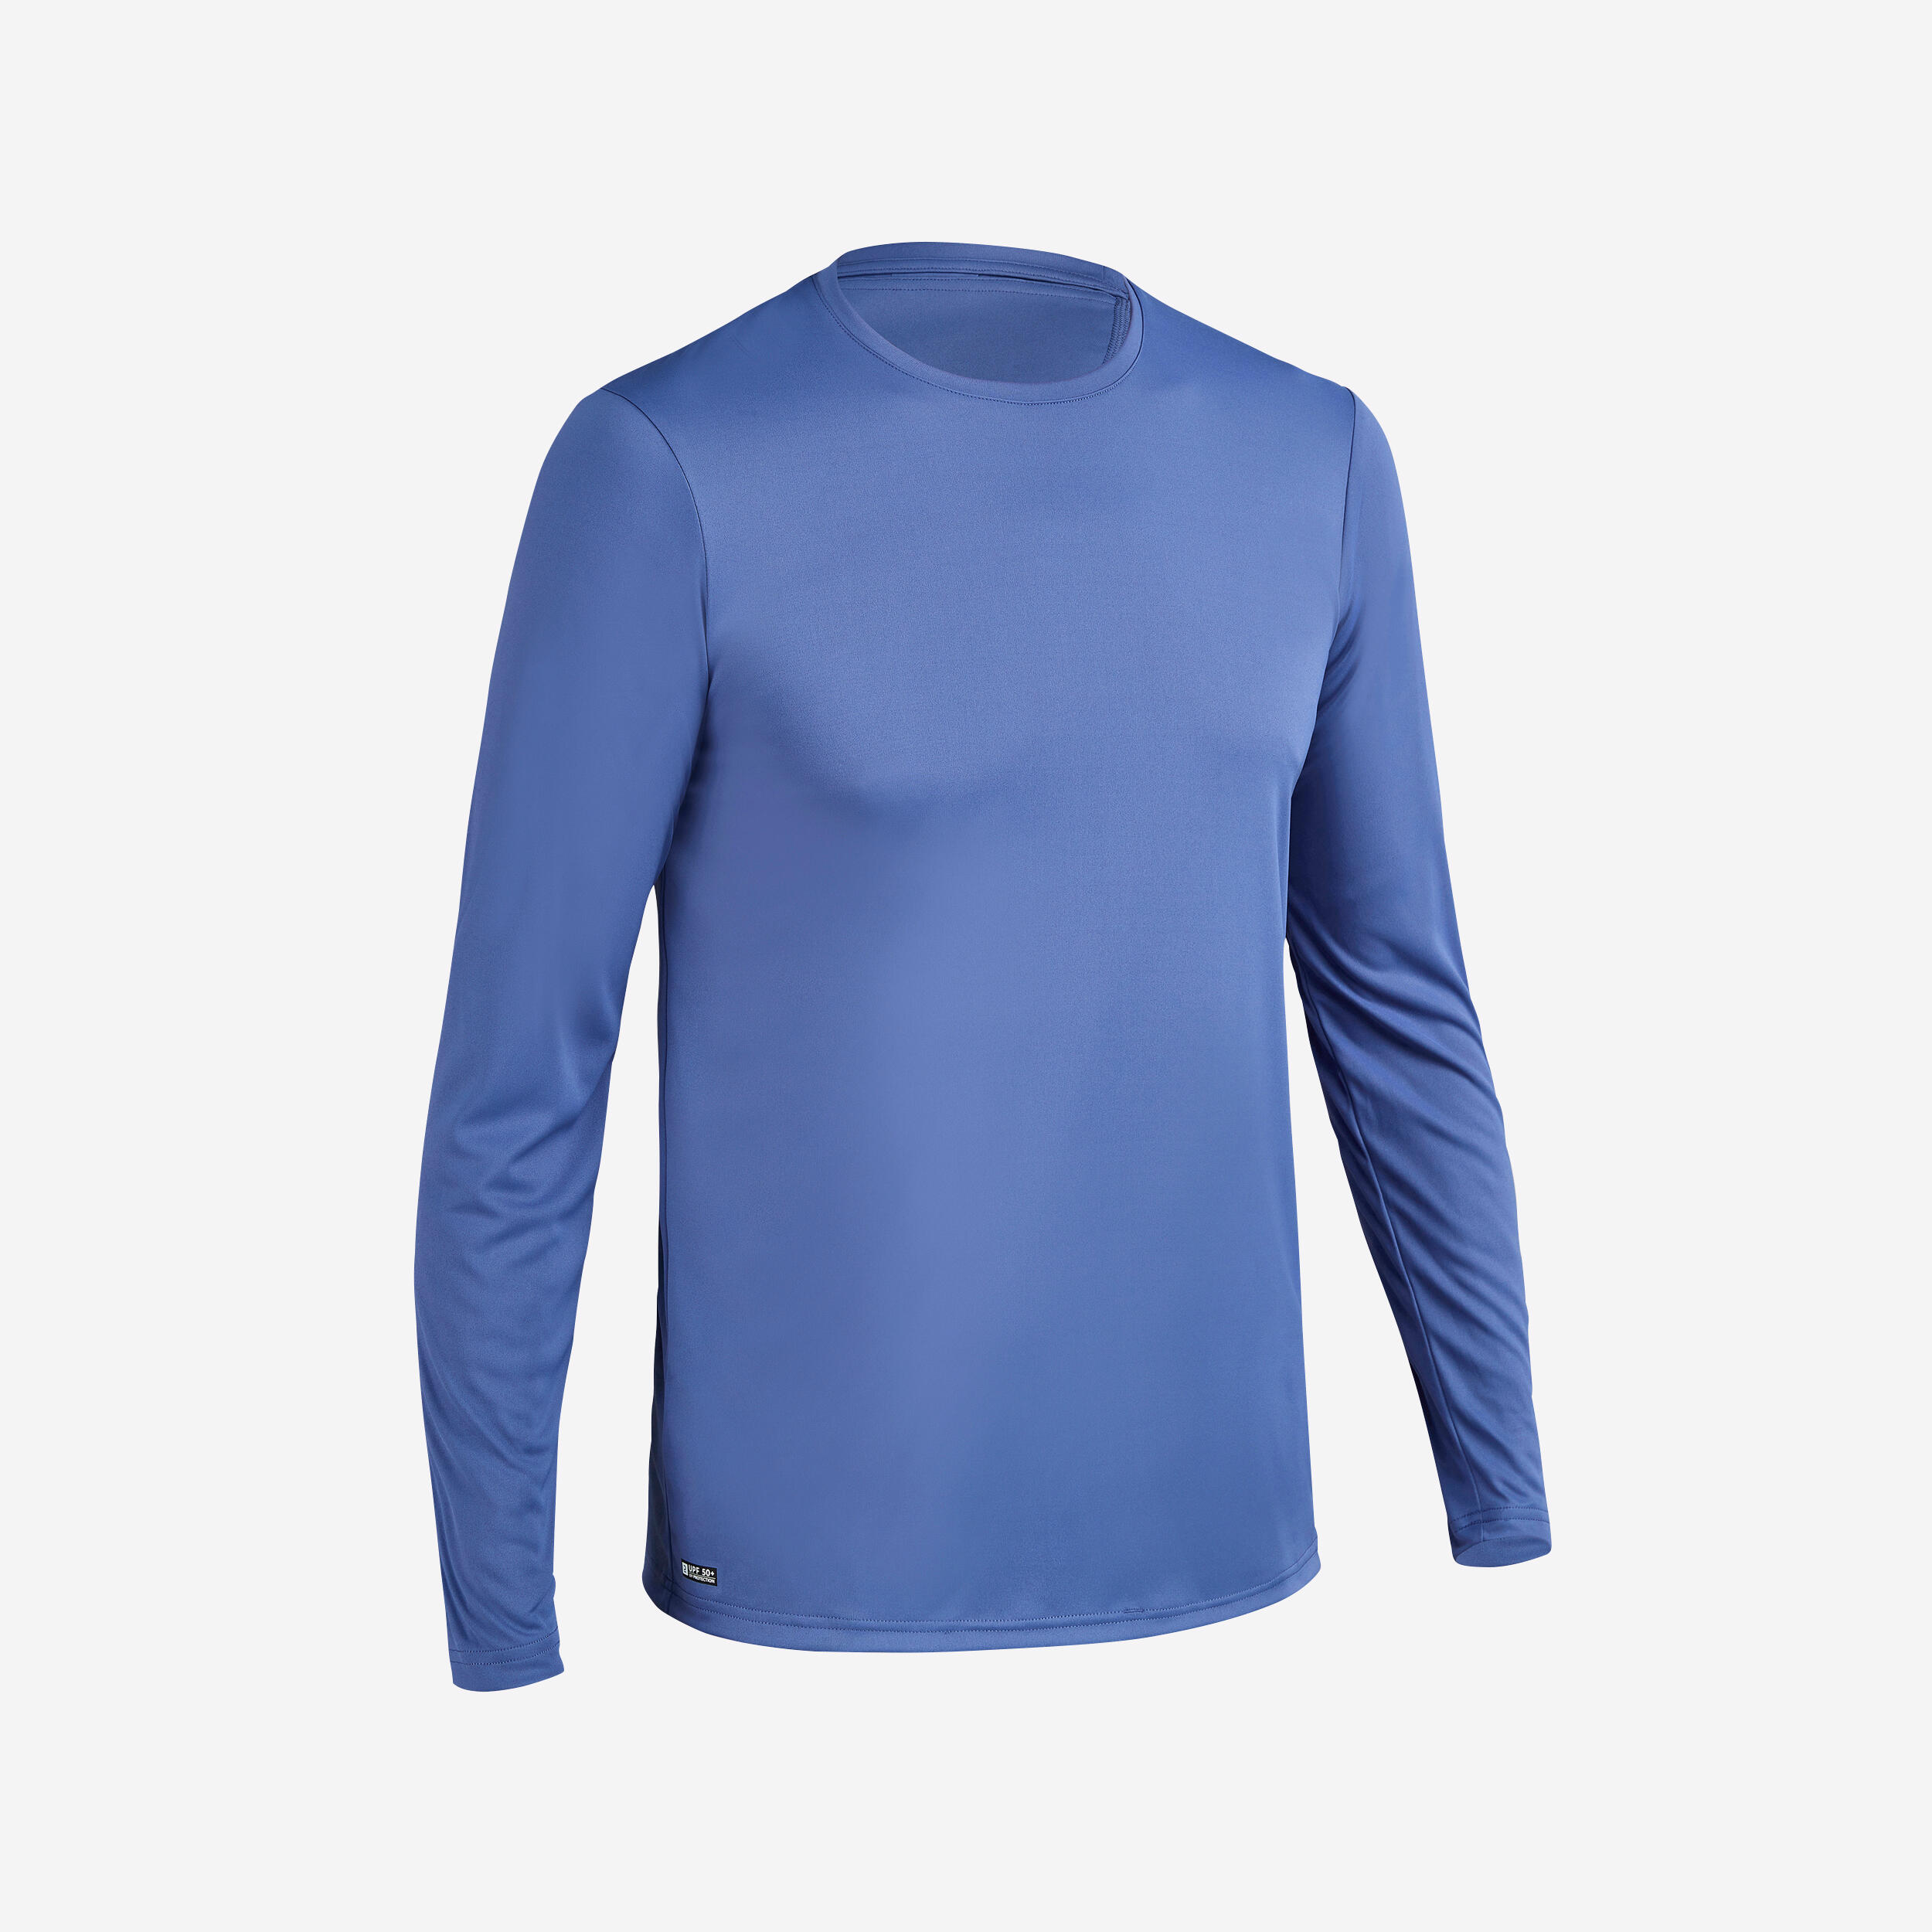 Men's surfing WATER T-SHIRT long sleeve UV-protection top - Blue OLAIAN